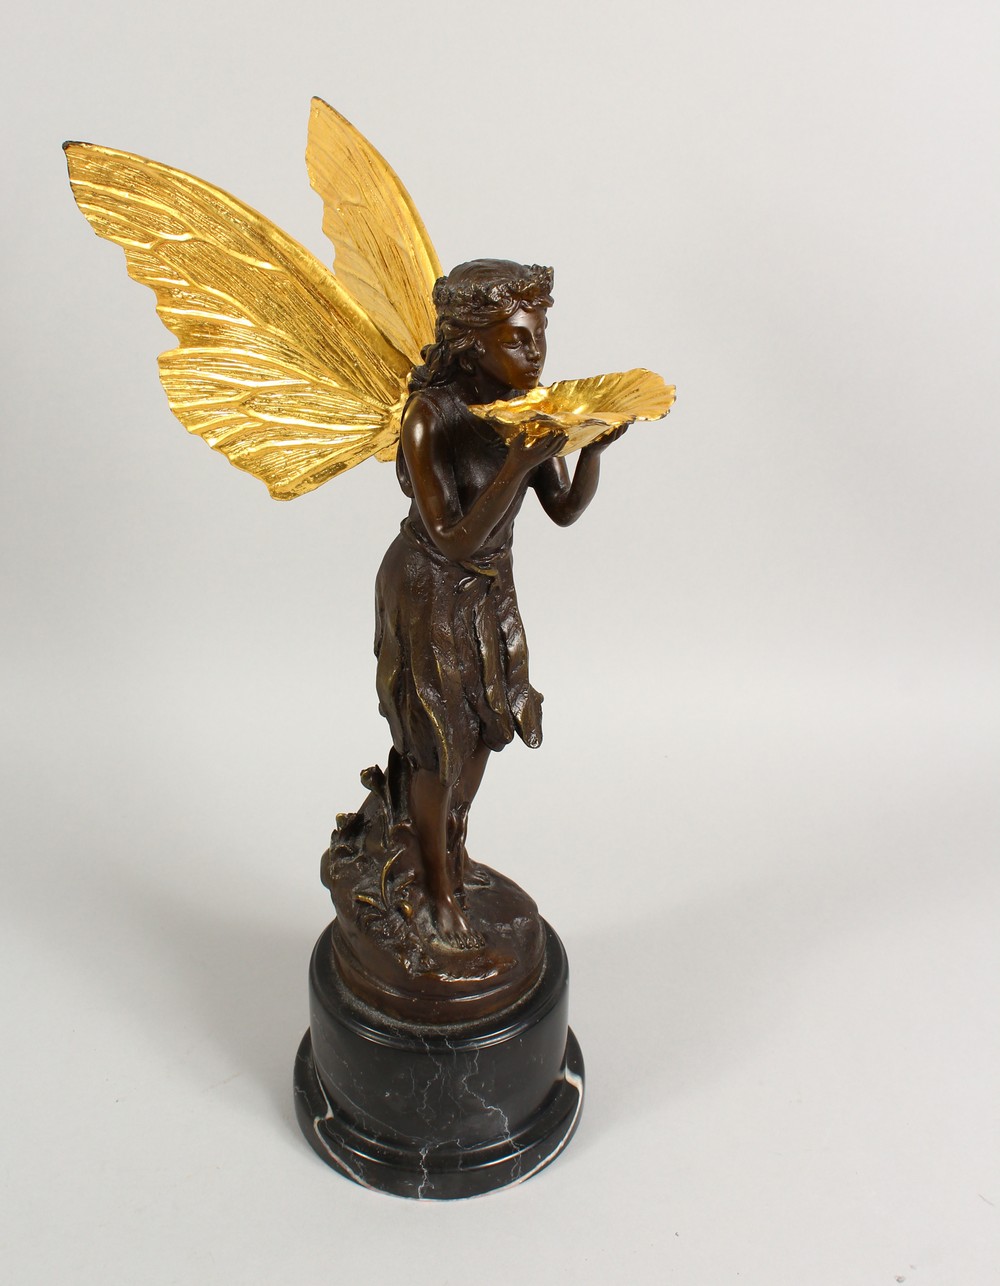 A BRONZE FIGURE OF A FAIRY, 20TH CENTURY, standing holding a shell in her hands, on a marble base.